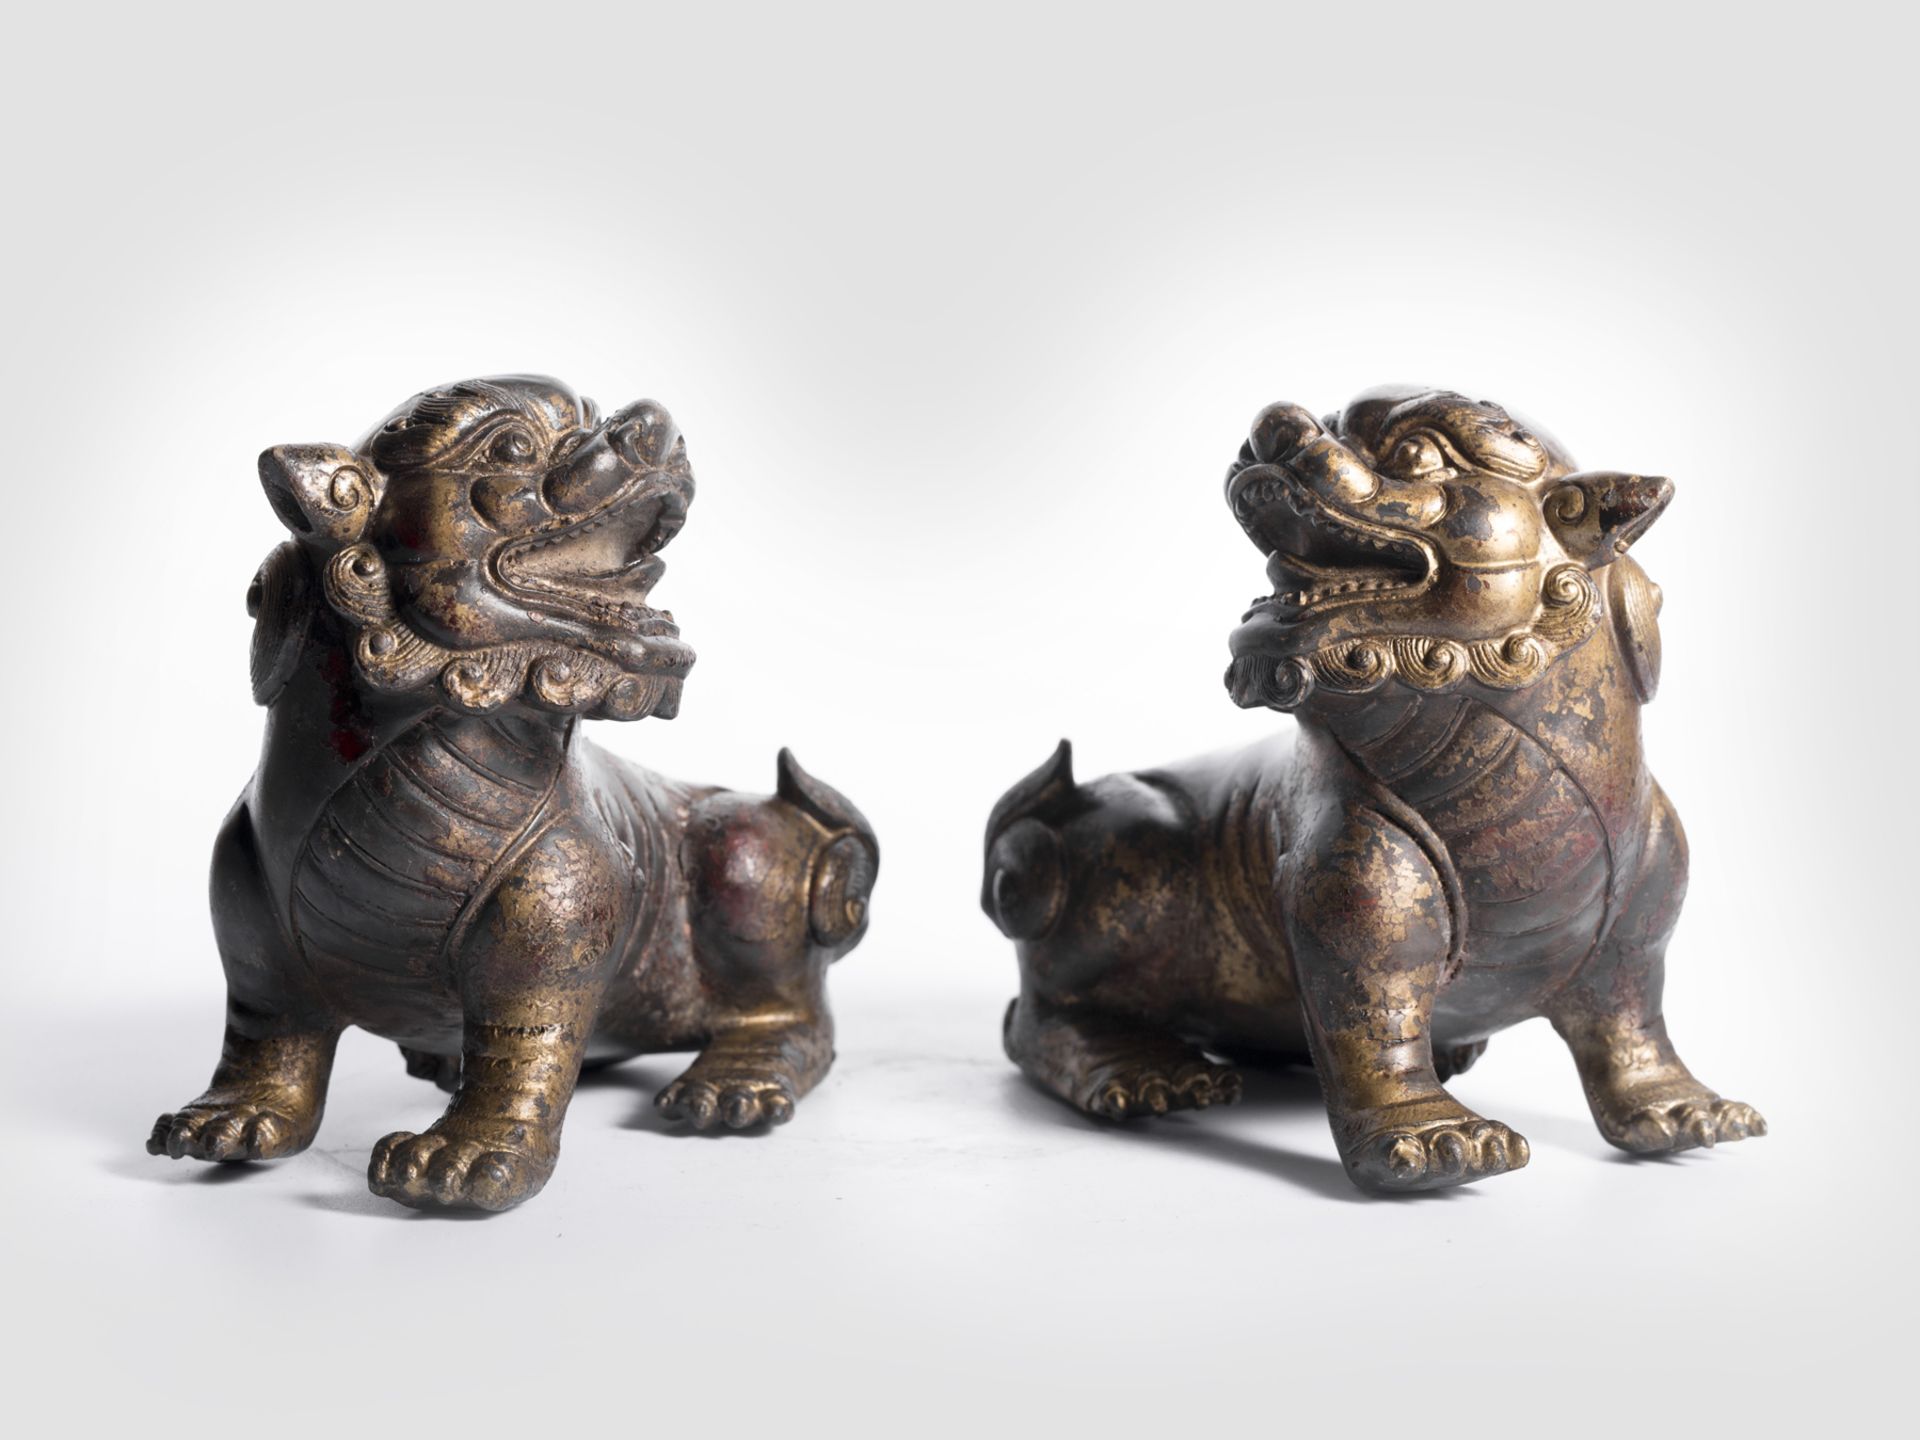 Pair of gilt bronze lions, China, Ming Dynasty, 1368 -1644